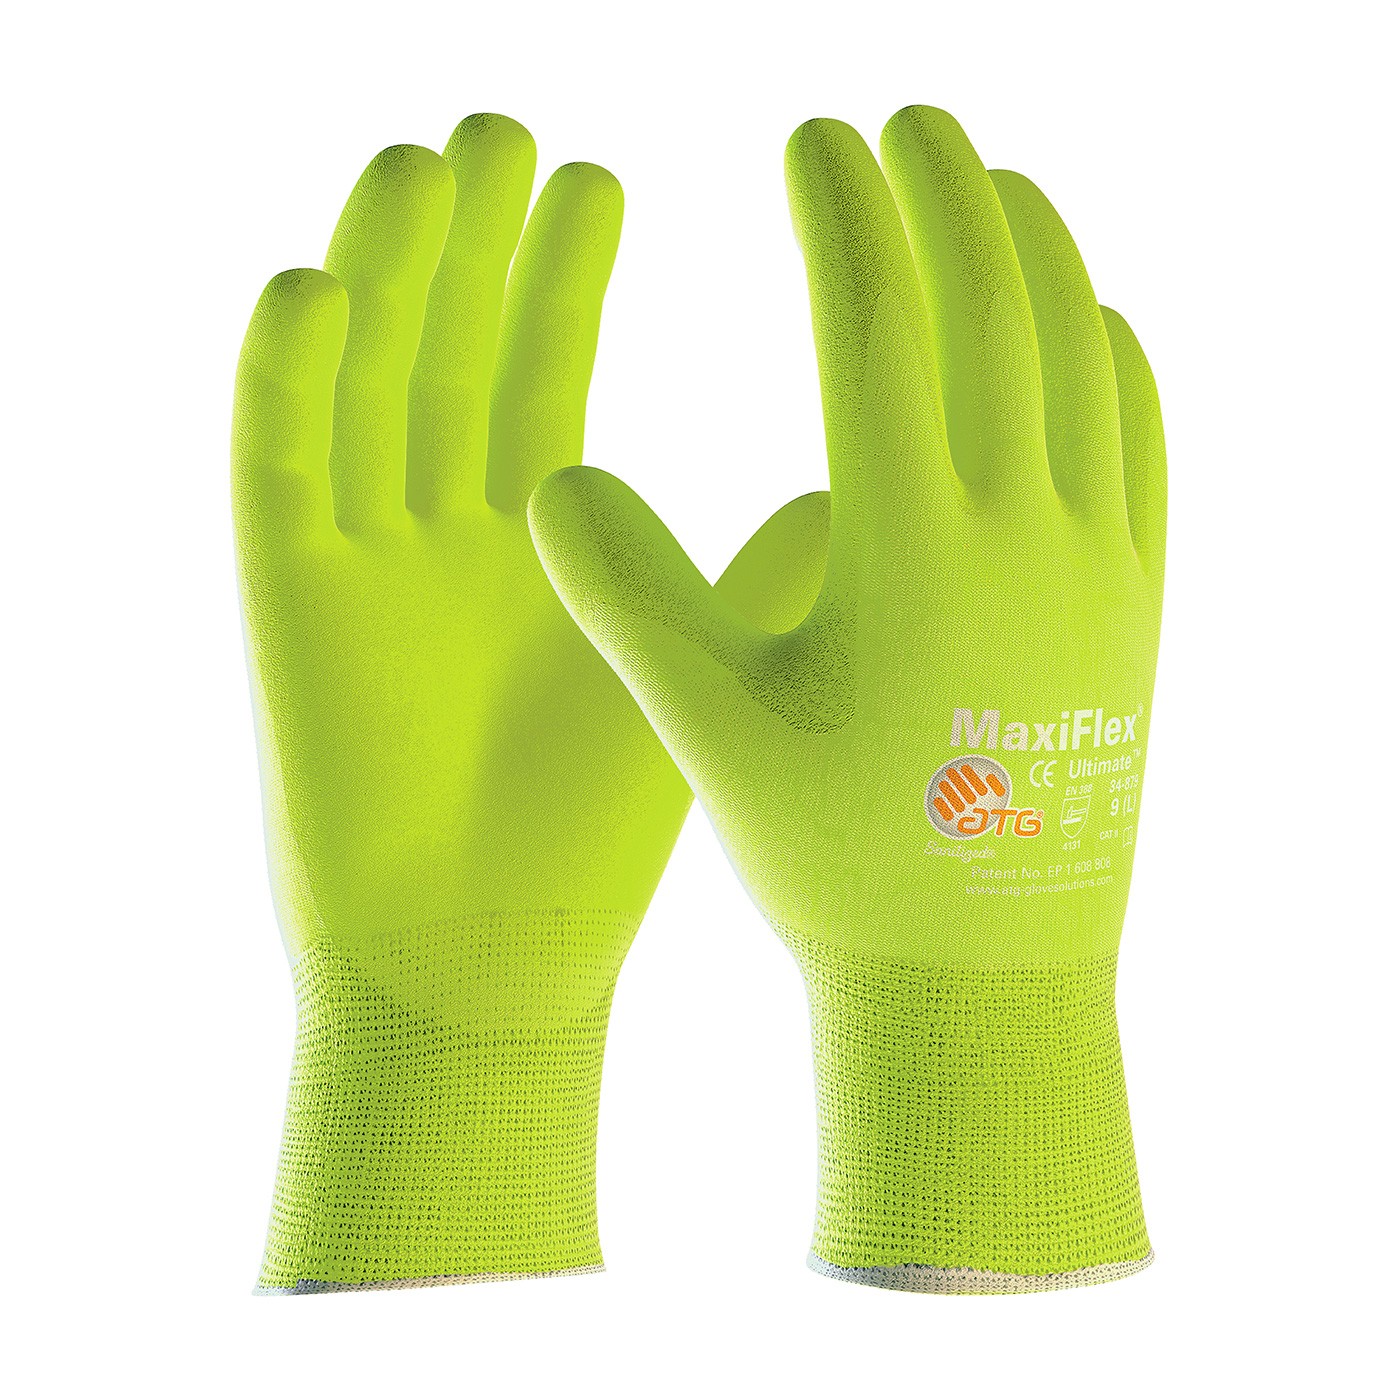 MaxiFlex® Ultimate™ Hi-Vis Seamless Knit Nylon / Lycra Glove with Nitrile Coated MicroFoam Grip on Palm & Fingers (#34-874FY)